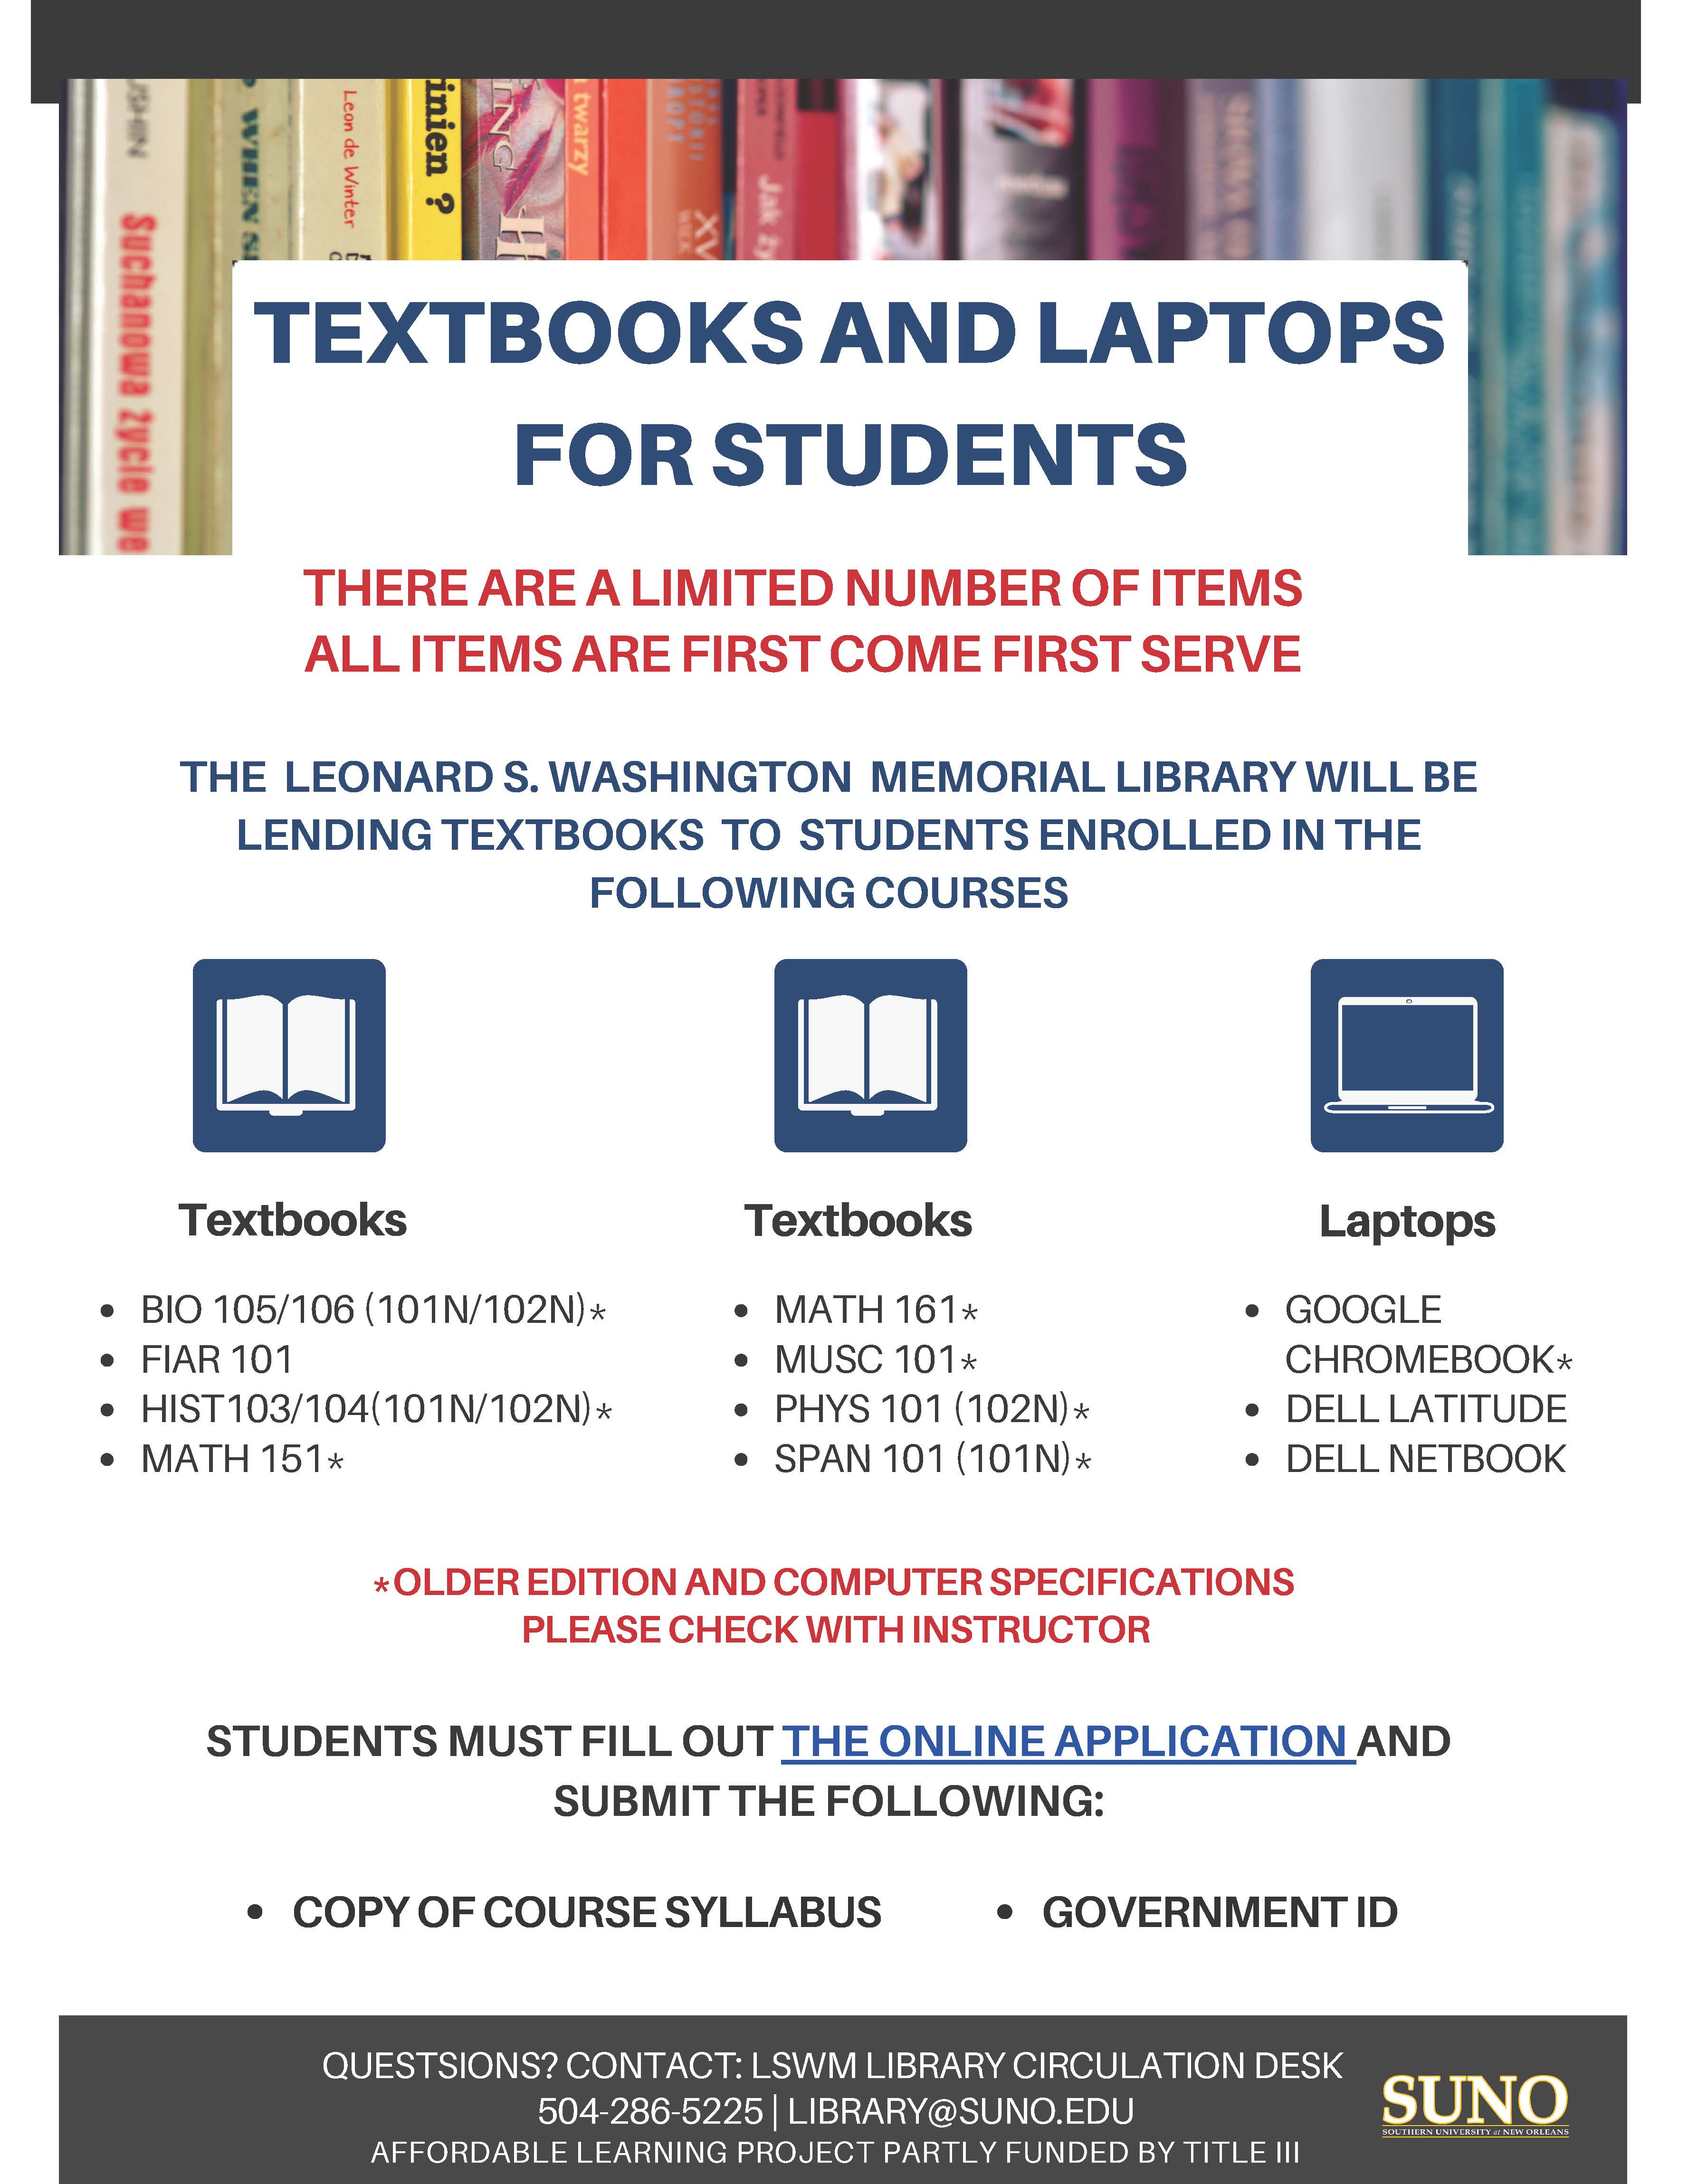 Textbook and Laptops for Students